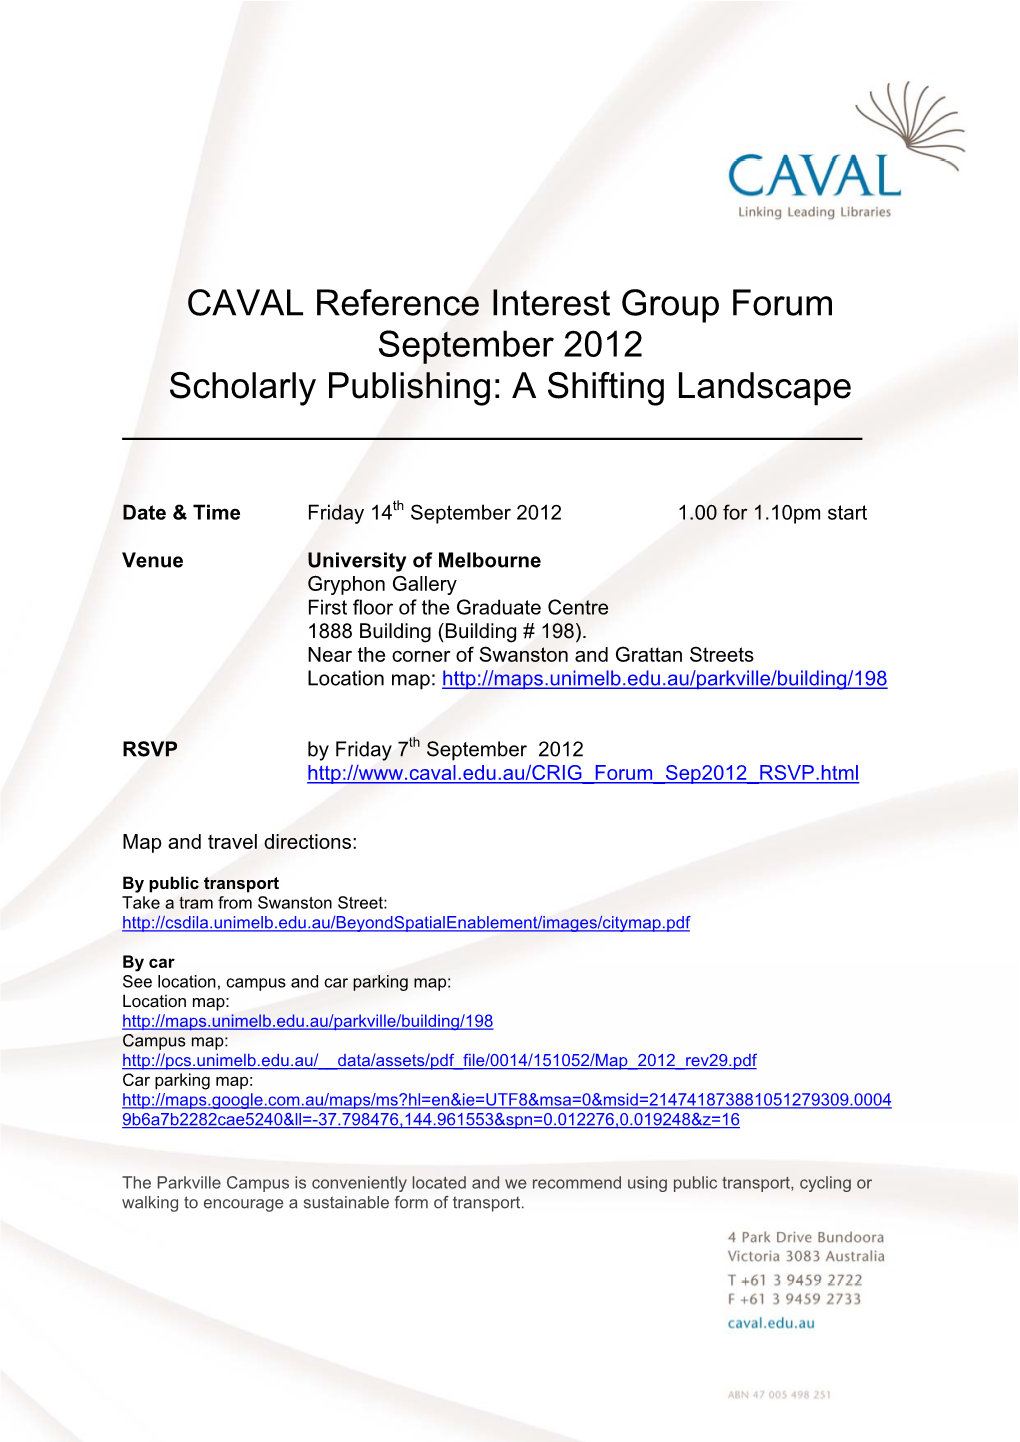 CAVAL Reference Interest Group Forum September 2012 Scholarly Publishing: a Shifting Landscape